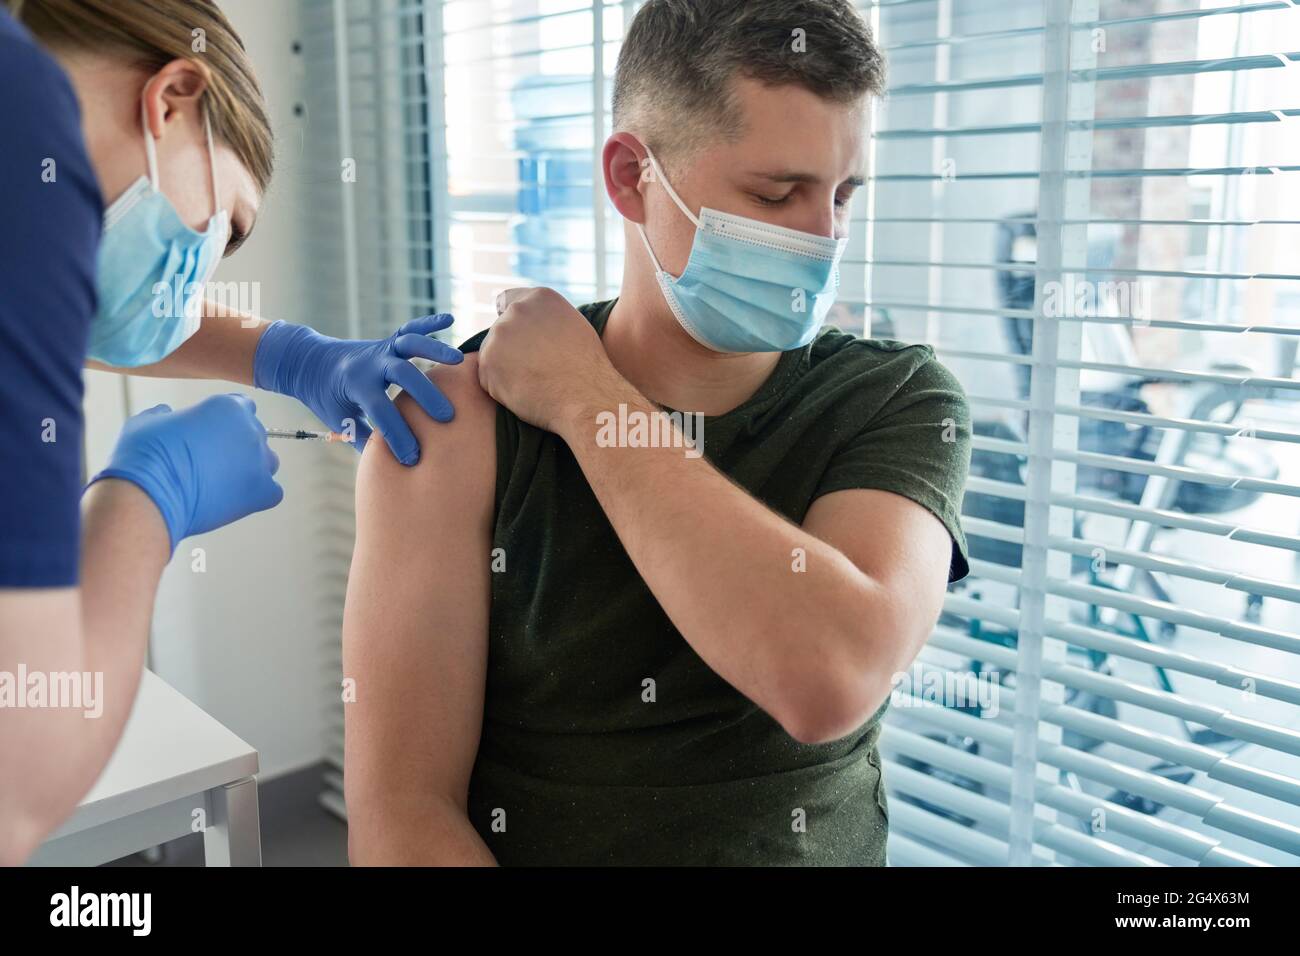 Female frontline worker injecting COVID-19 vaccine dose on arm of patient at center Stock Photo